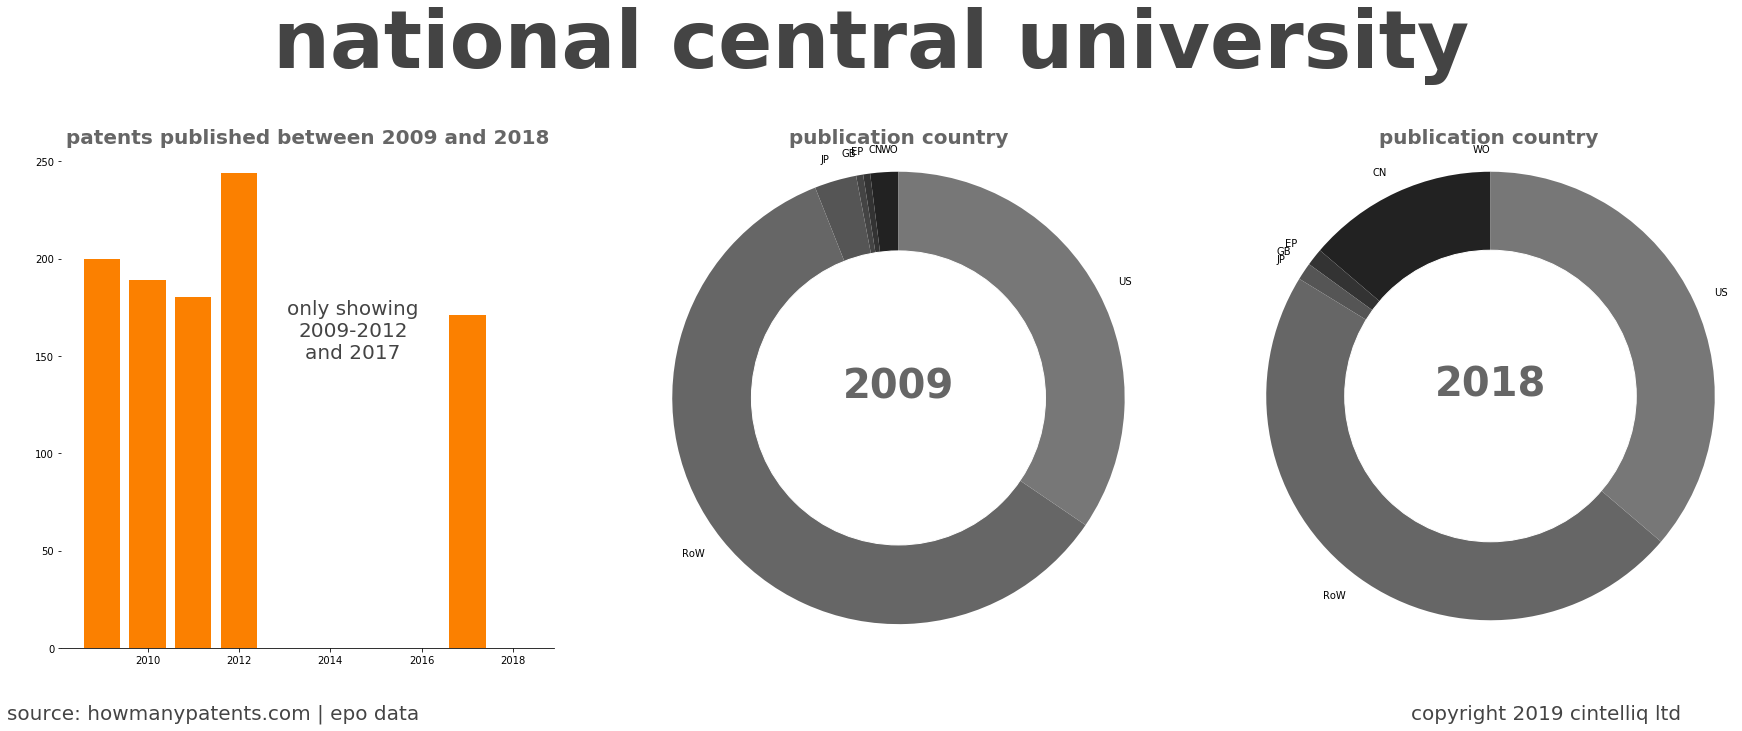 summary of patents for National Central University